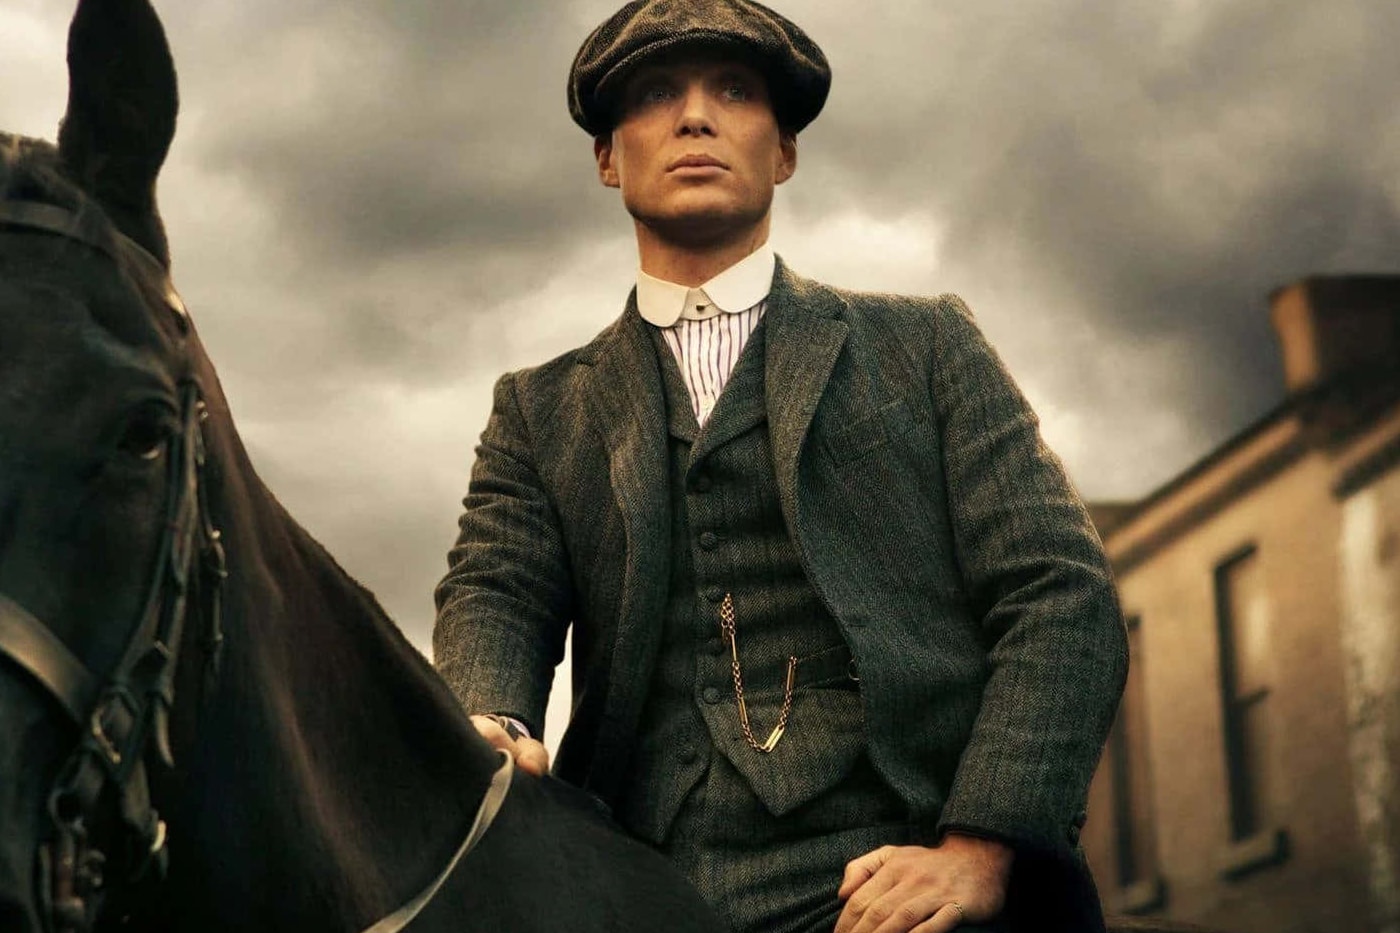 https://image-cdn.hypb.st/https%3A%2F%2Fhypebeast.com%2Fimage%2F2023%2F12%2Ftwo-peaky-blinders-spinoffs-reports-001.jpg?cbr=1&q=90